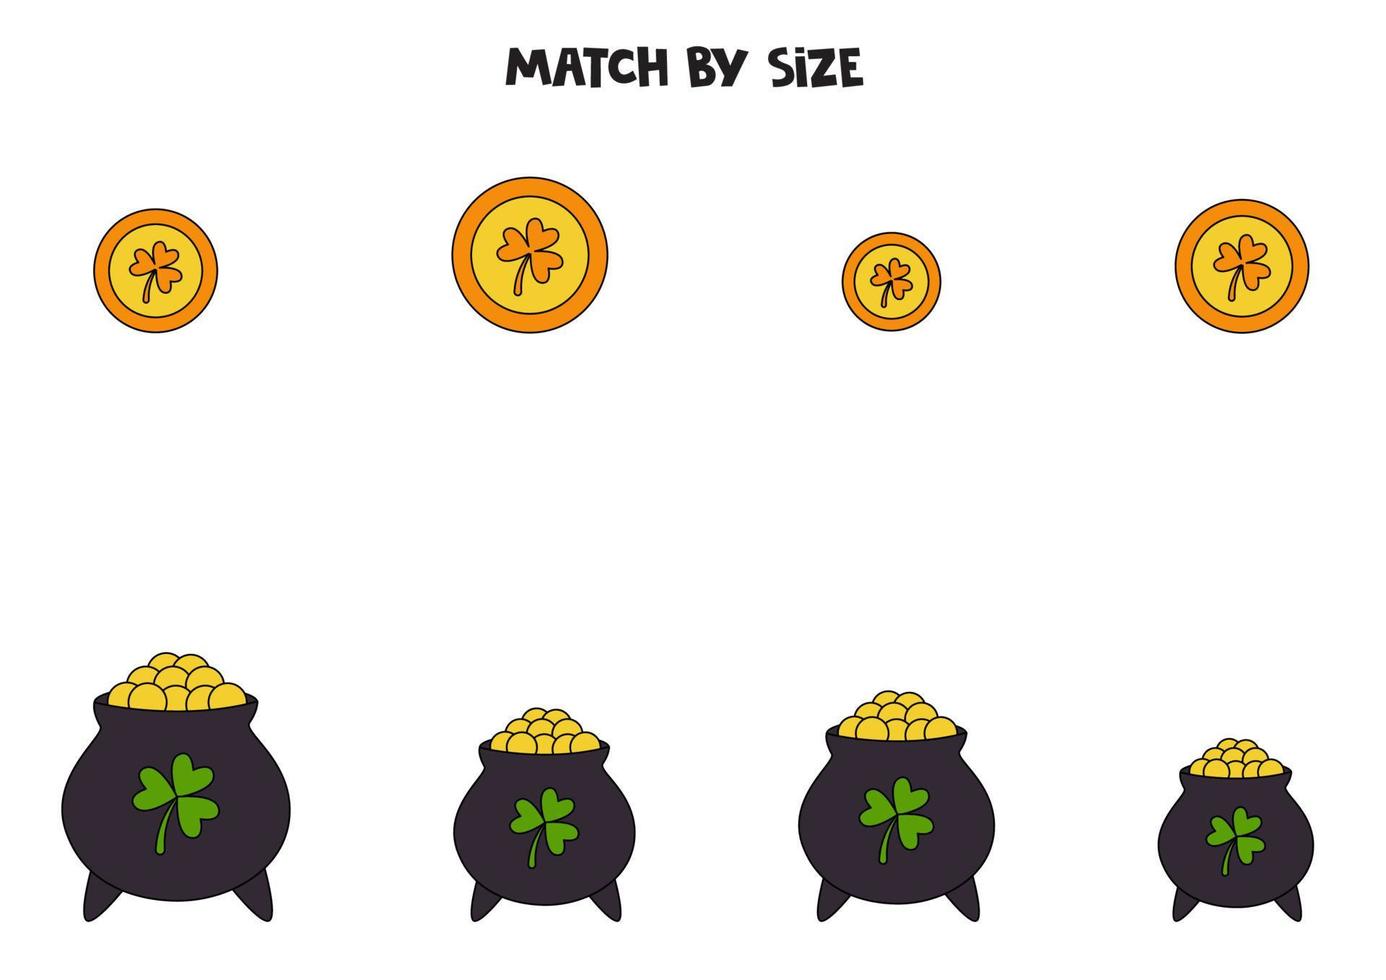 Matching game for preschool kids. Match coins and pots of gold by size. vector